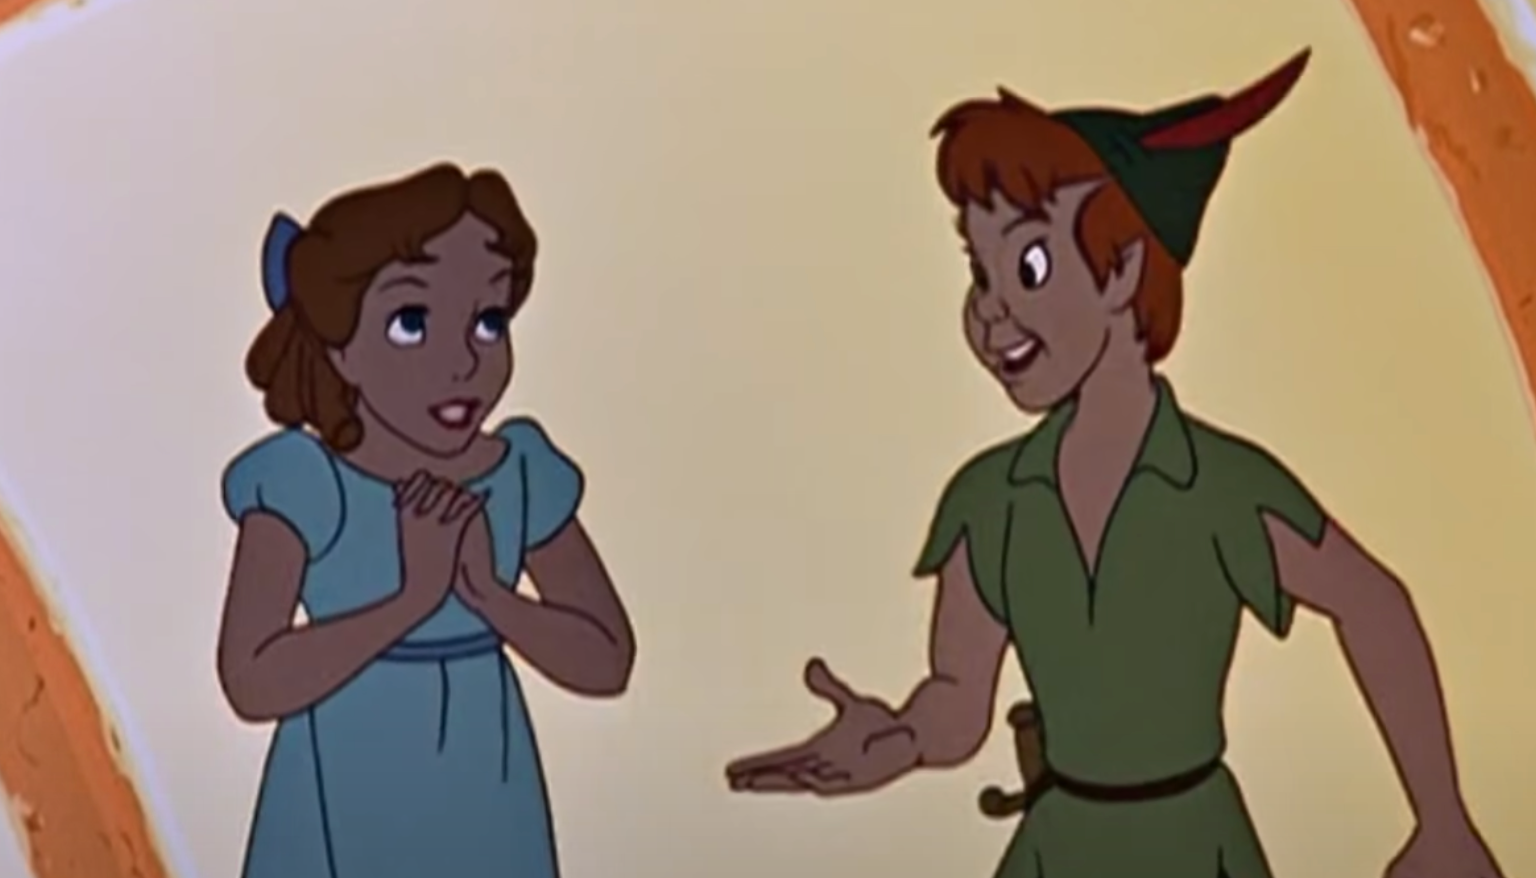 Peter Pan and Wendy' Movie 2021: Cast, Release Date, and Plot